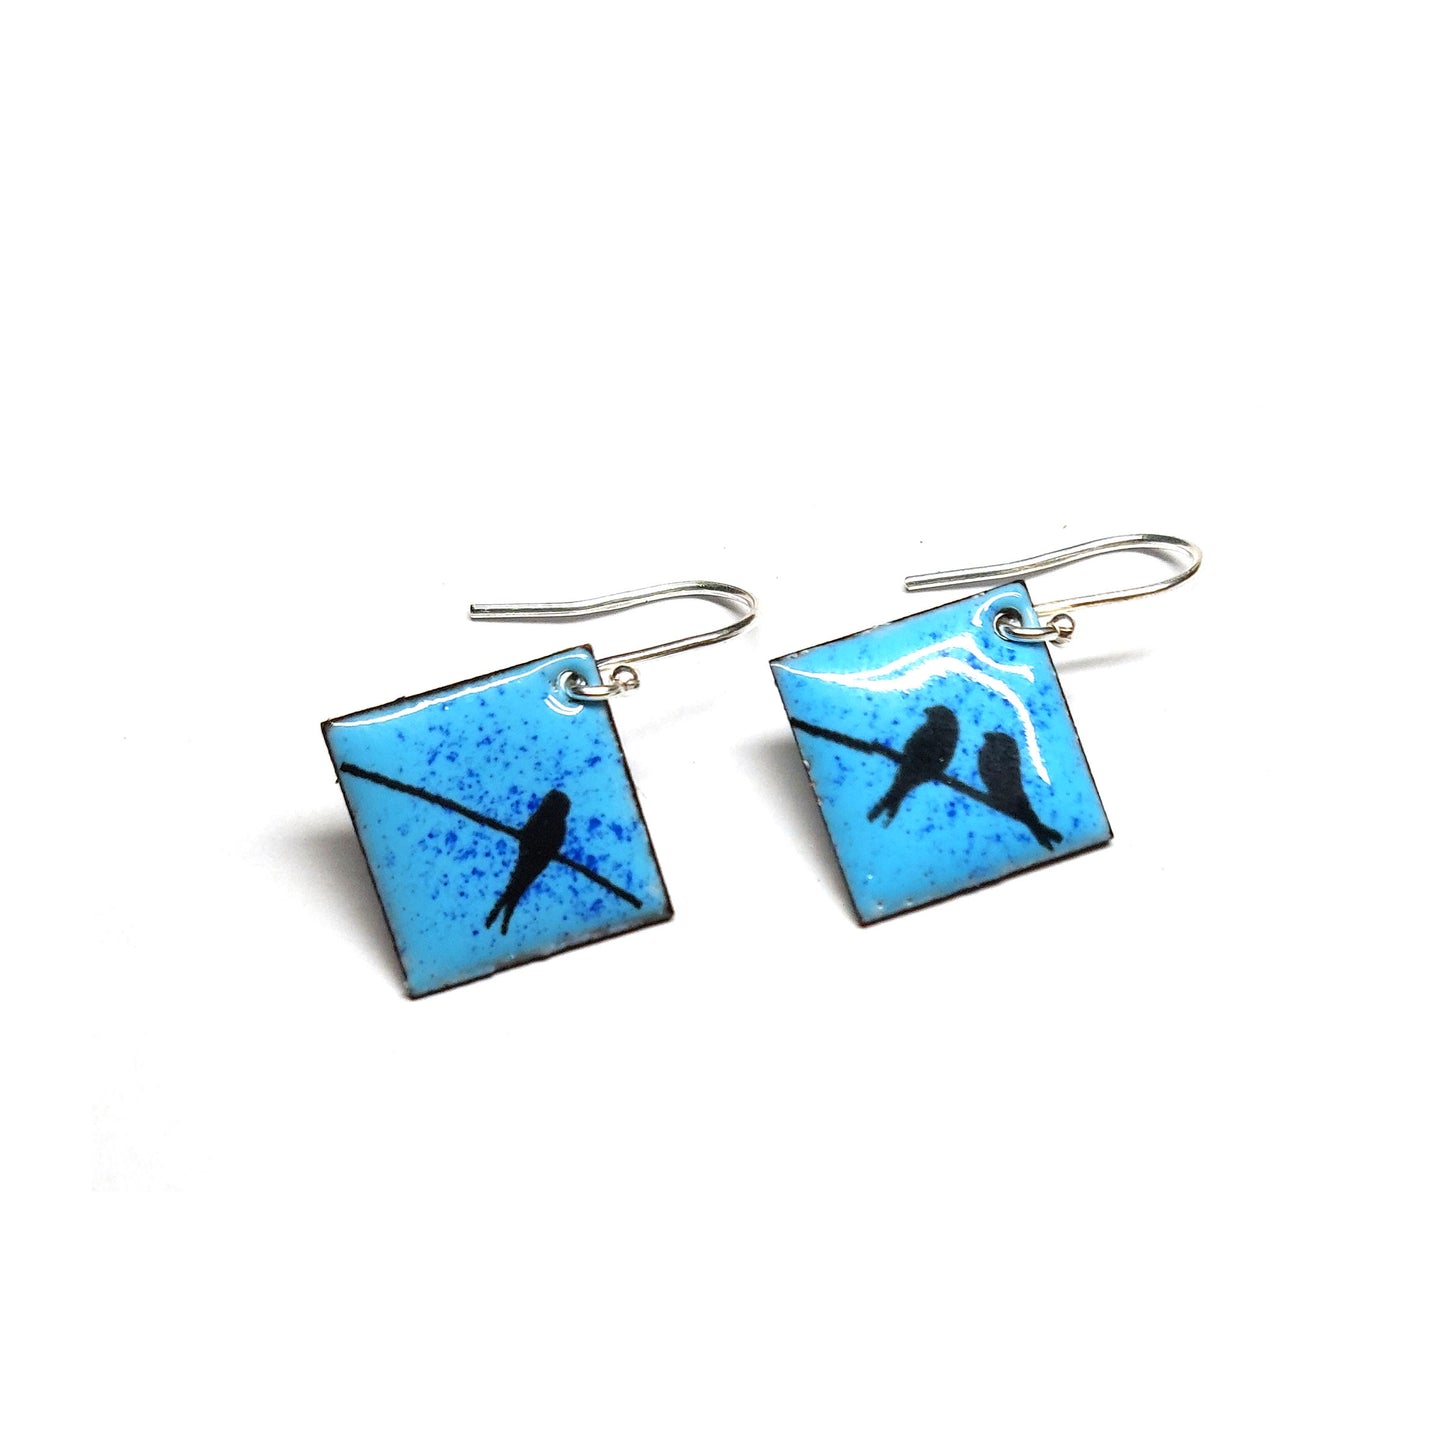 Square drop earrings featuring silhouettes of birds sitting on a wire against a blue enamel background.